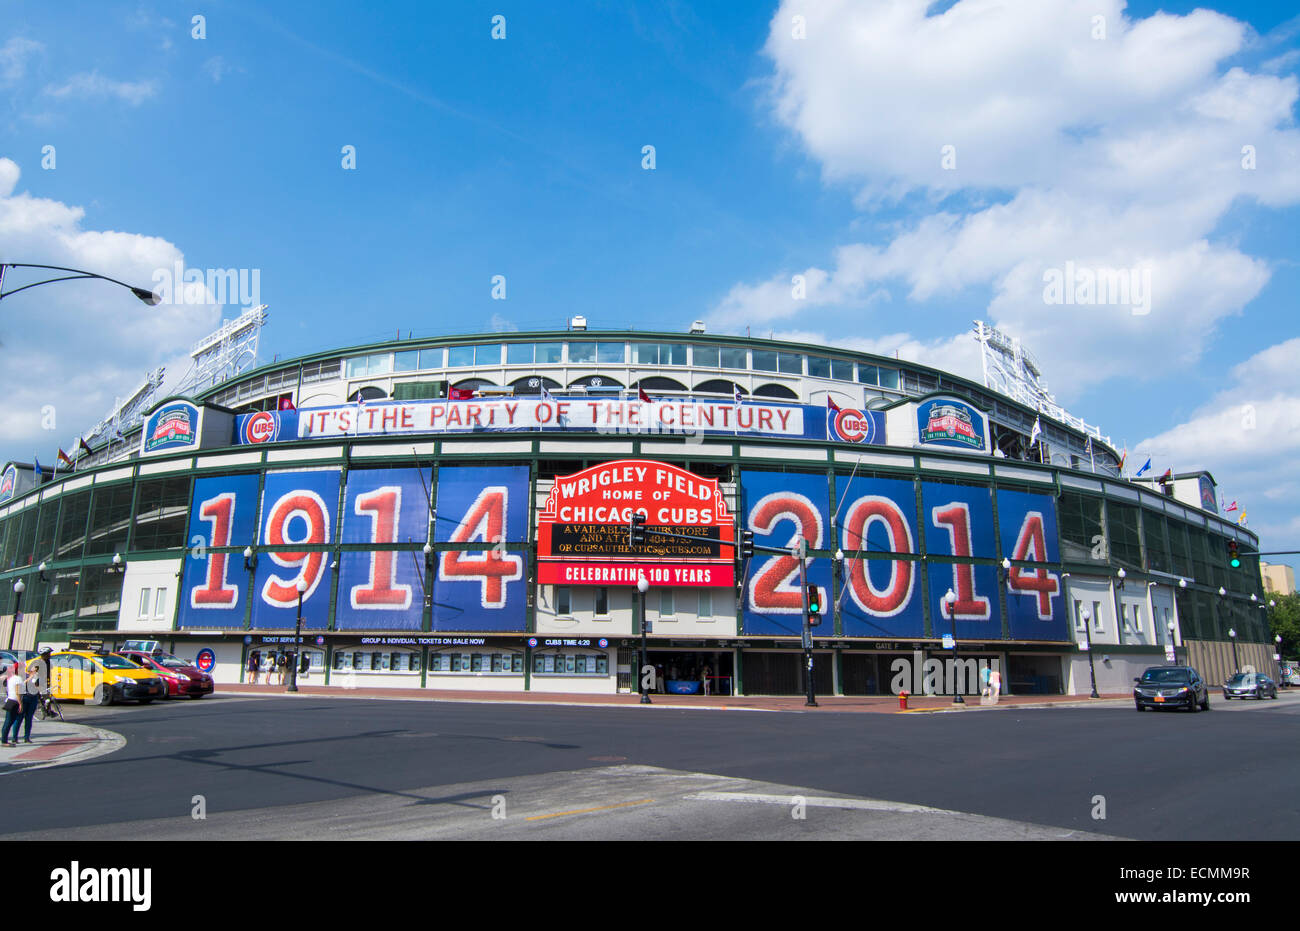 Wrigley Field - Chicago: Get the Detail of Wrigley Field on Times